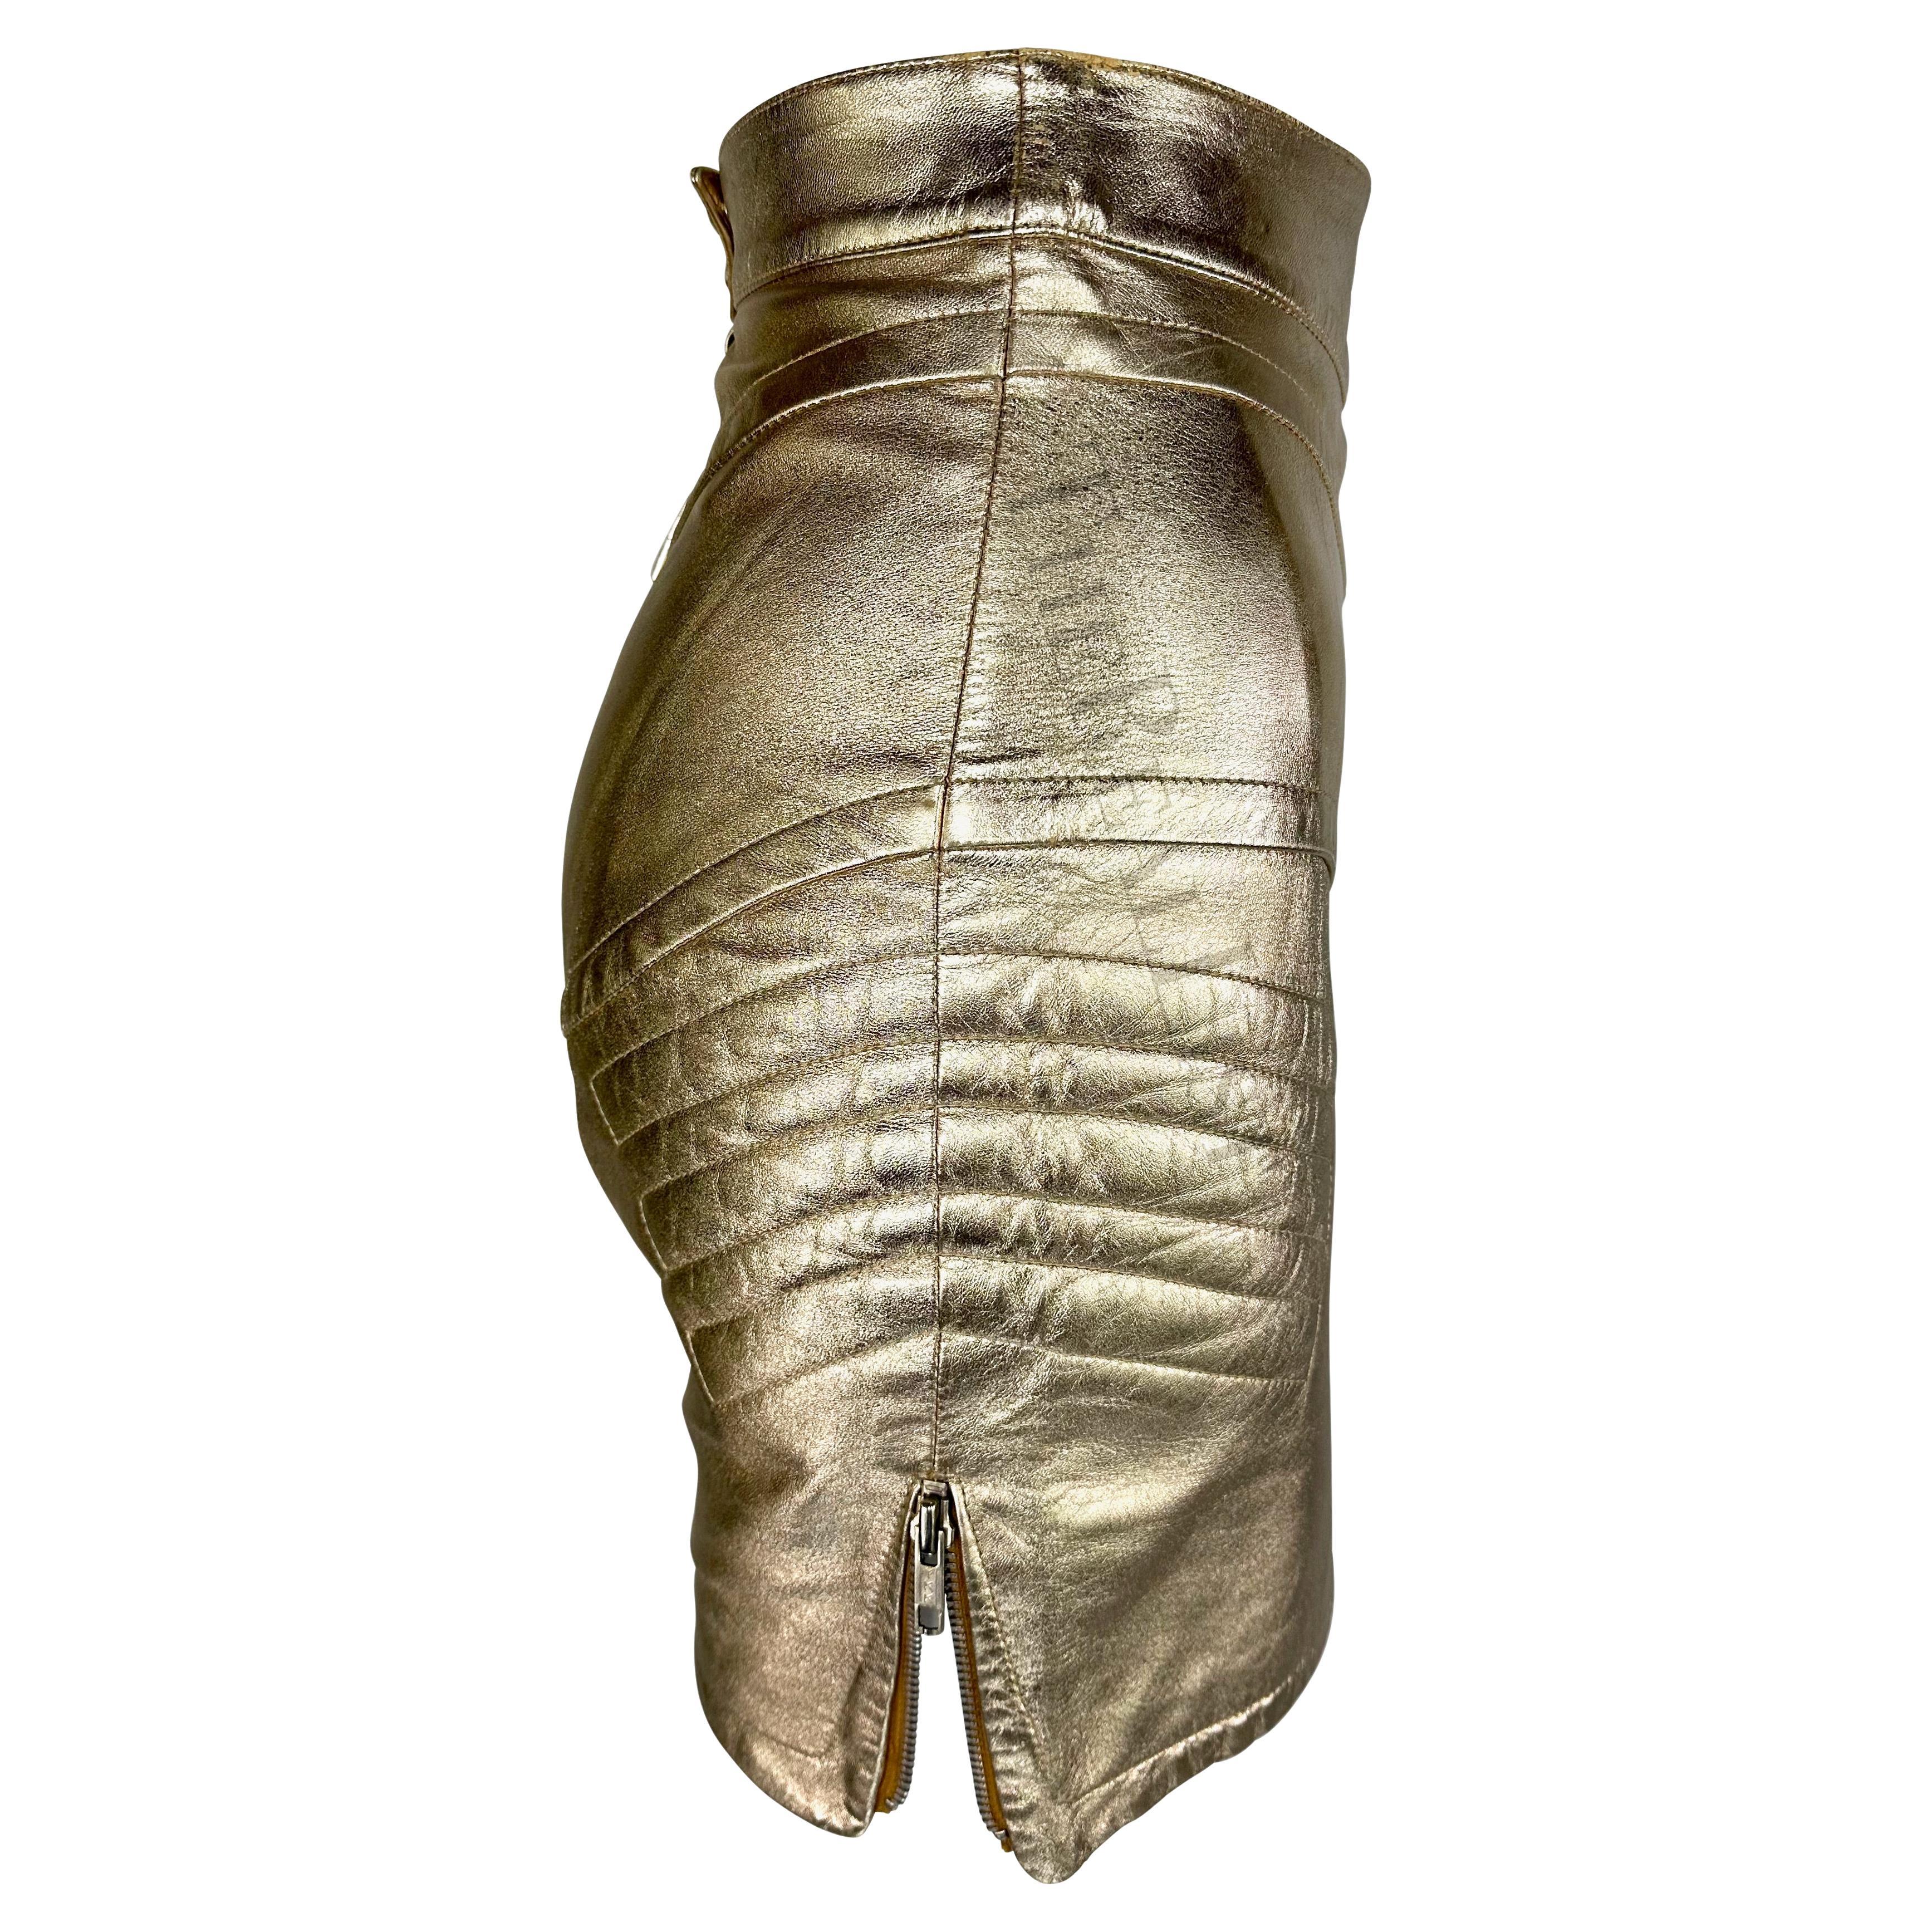 Early 1990s Thierry Mugler Metallic Gold Leather Biker Moto Skirt In Good Condition For Sale In West Hollywood, CA